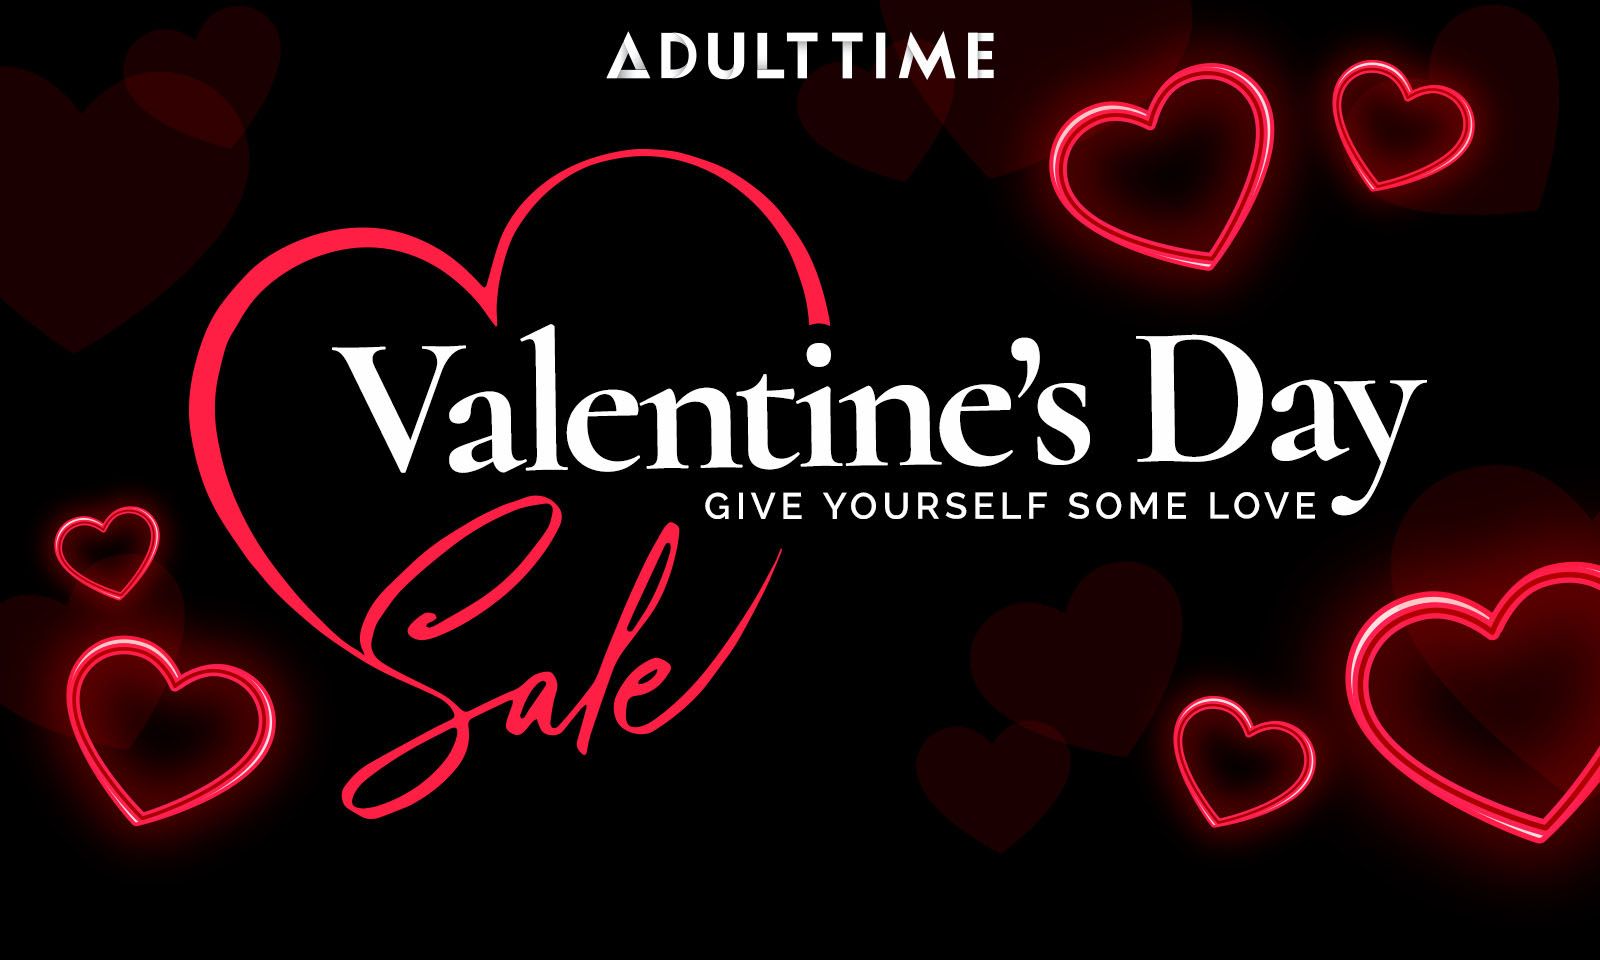 Adult Time's Valentine’s Day Promotion To Run Through February 17